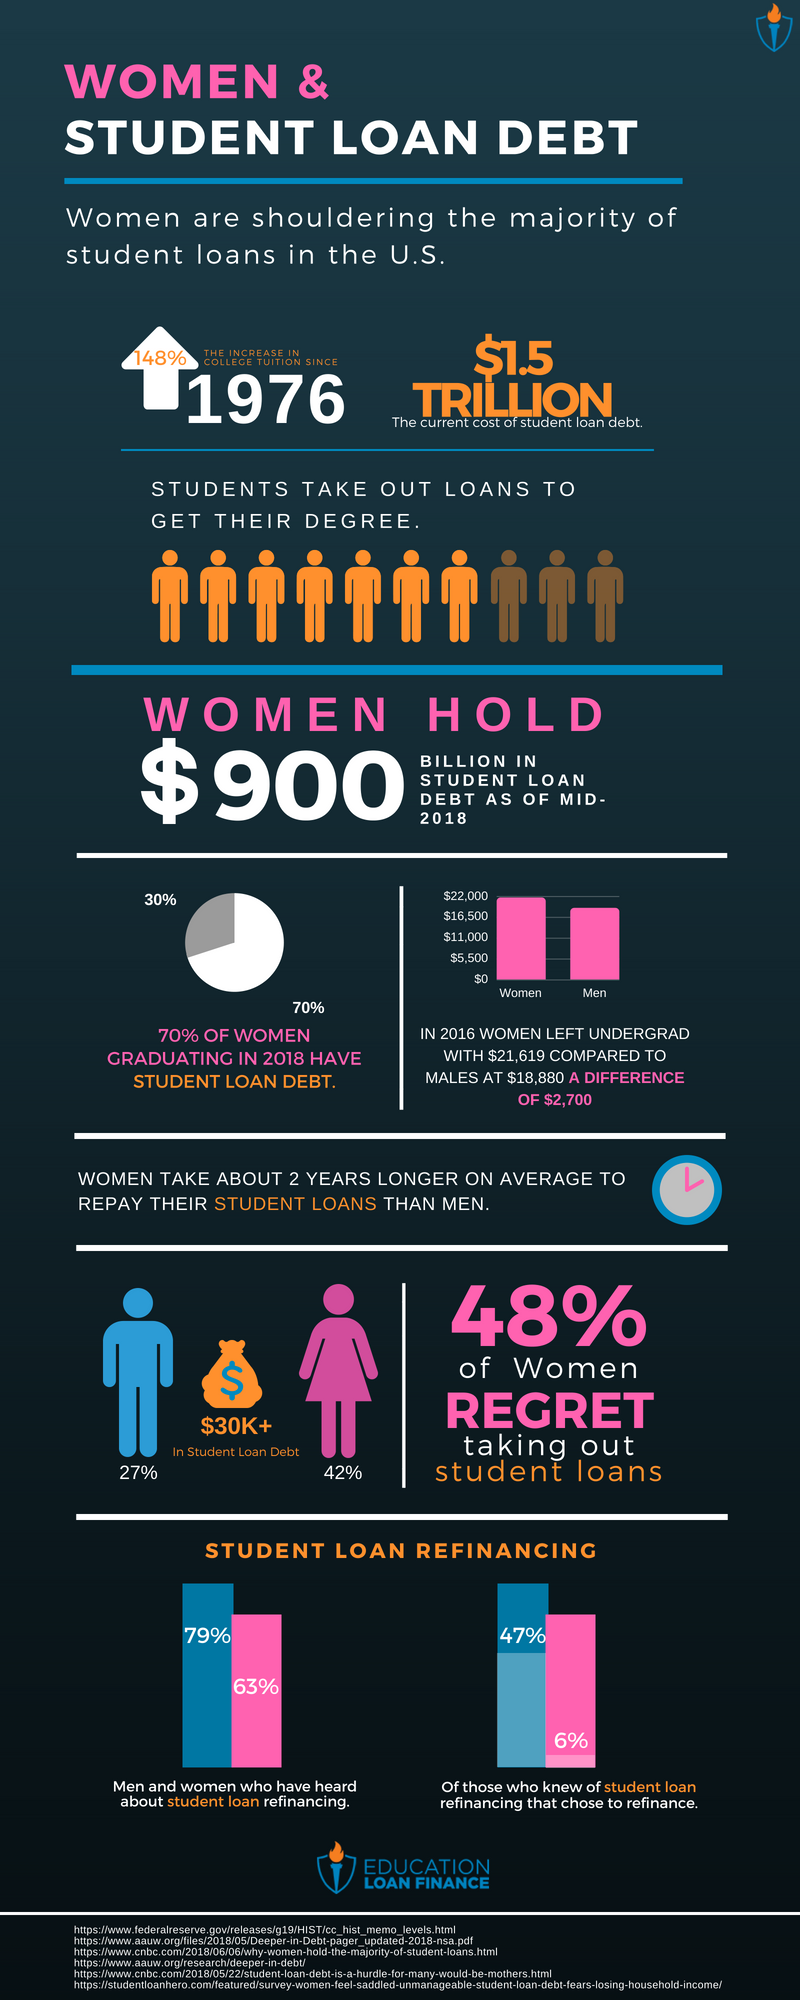 Women and Student Loan Debt